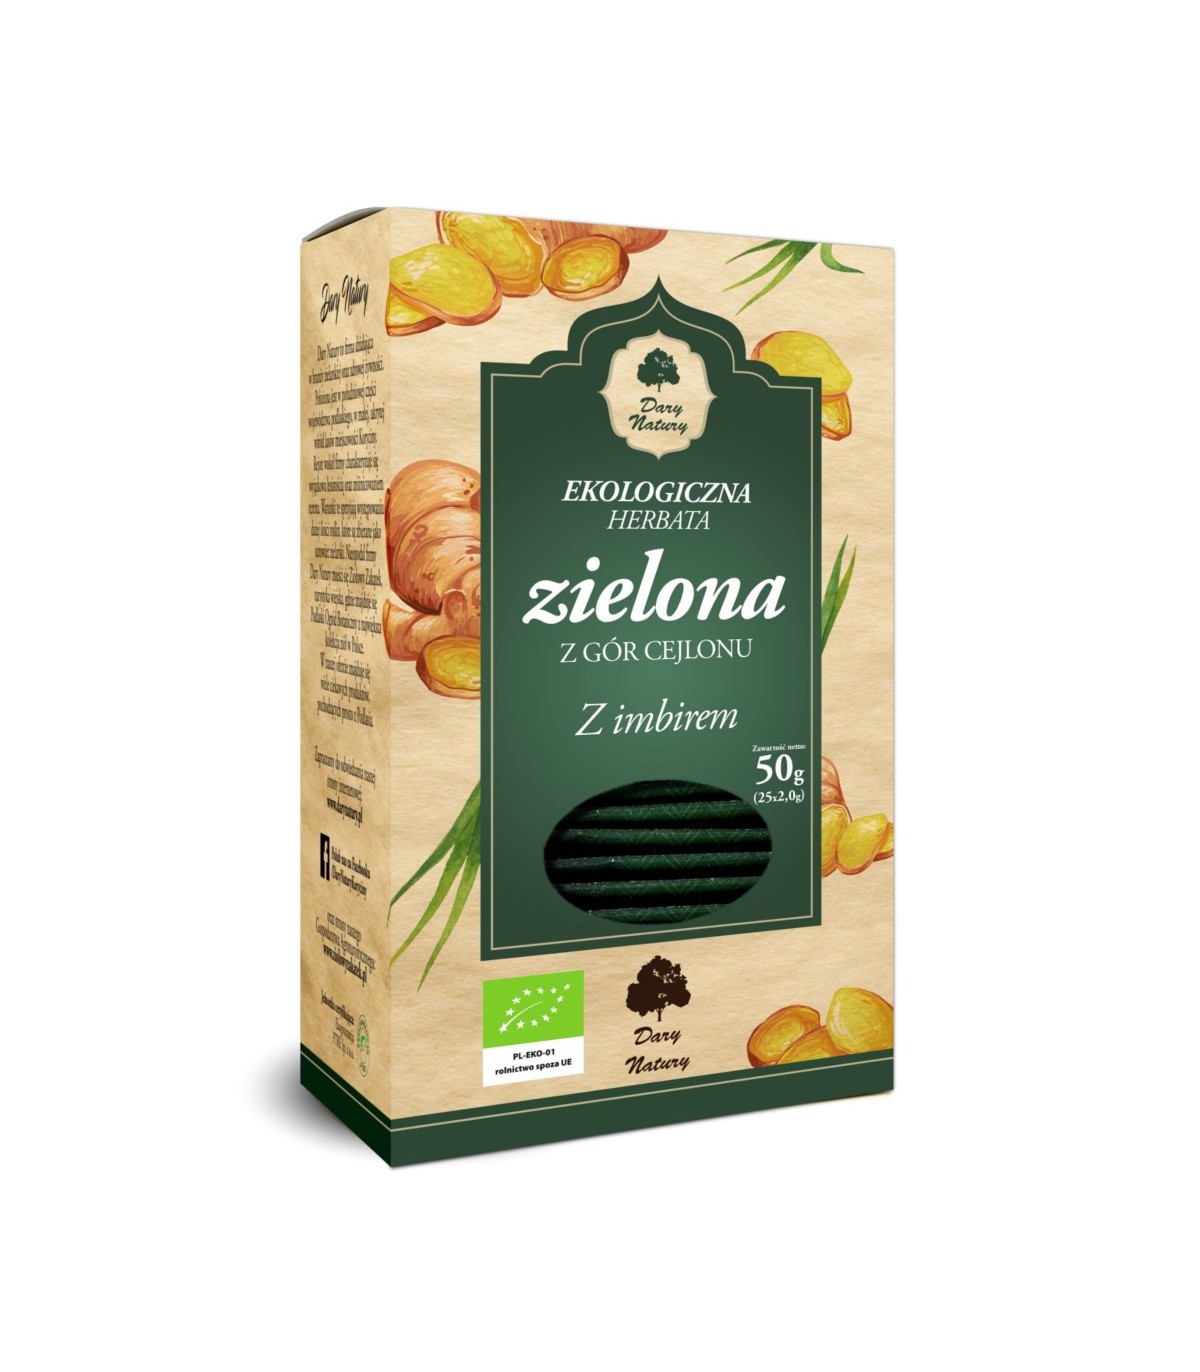 Green Ceylon Tea with Ginger, Ecological, Dary Natury 25 tea bags